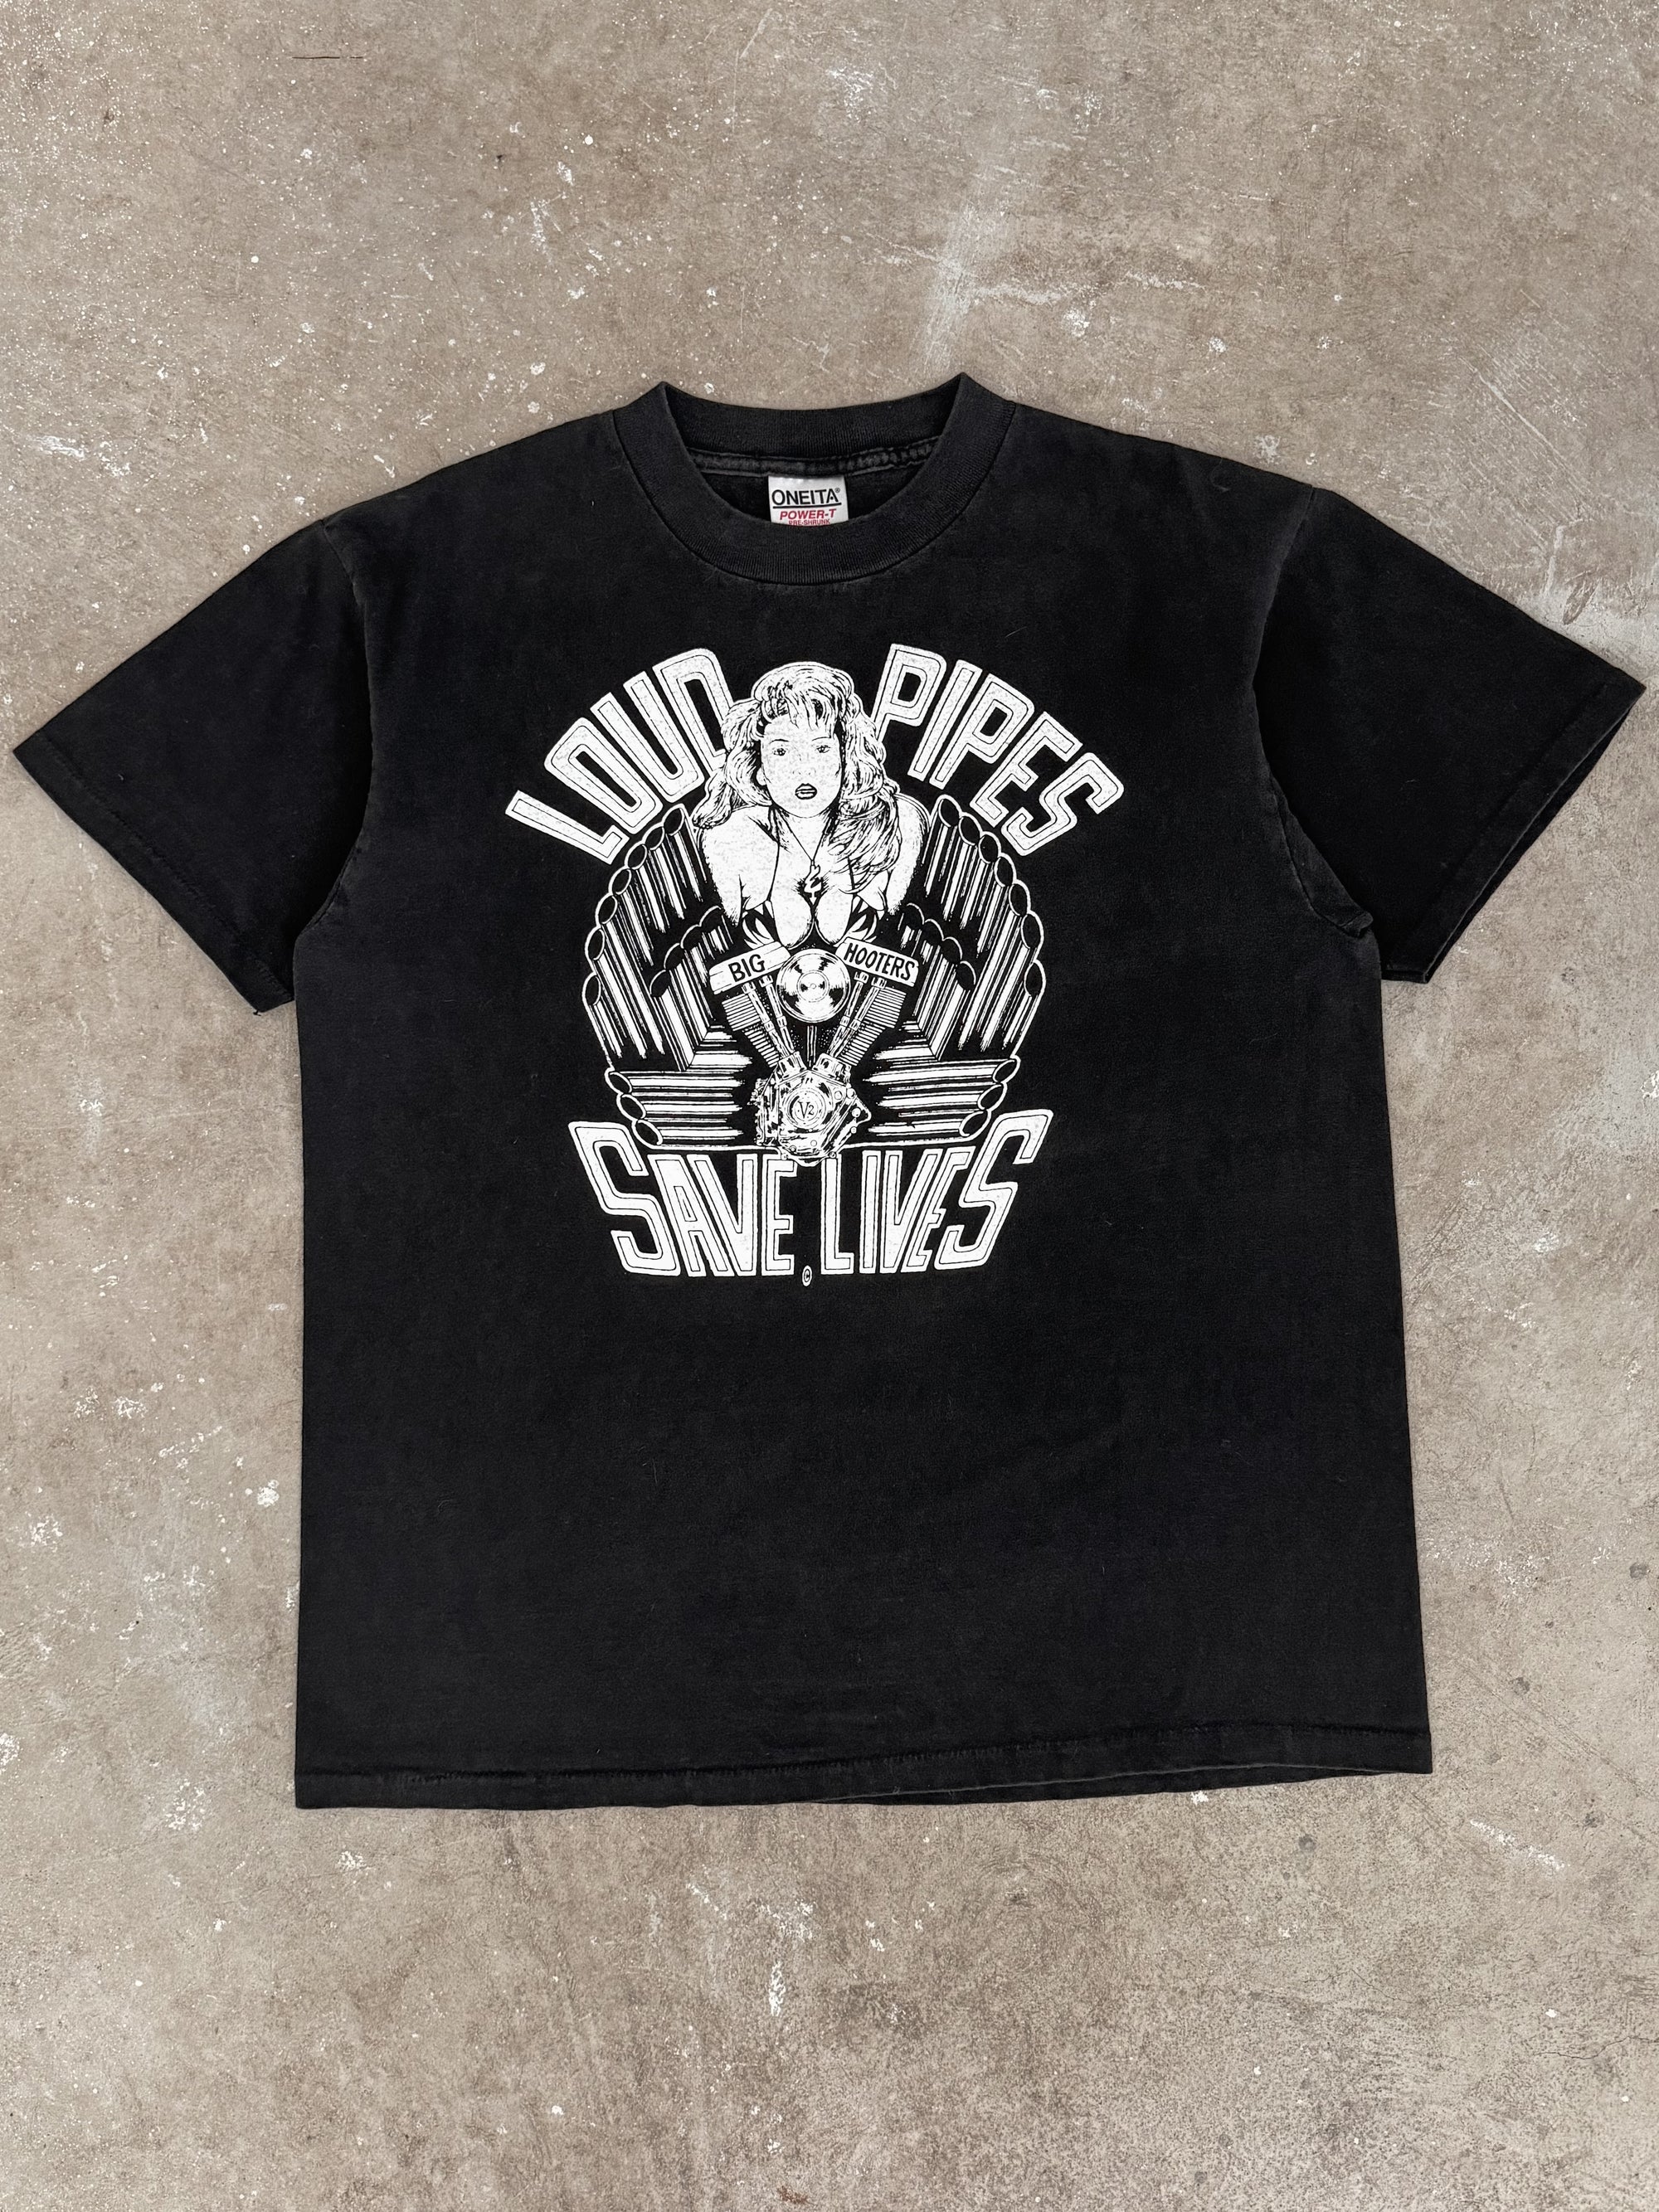 1990s "Loud Pipes Save Lives" Tee (L)